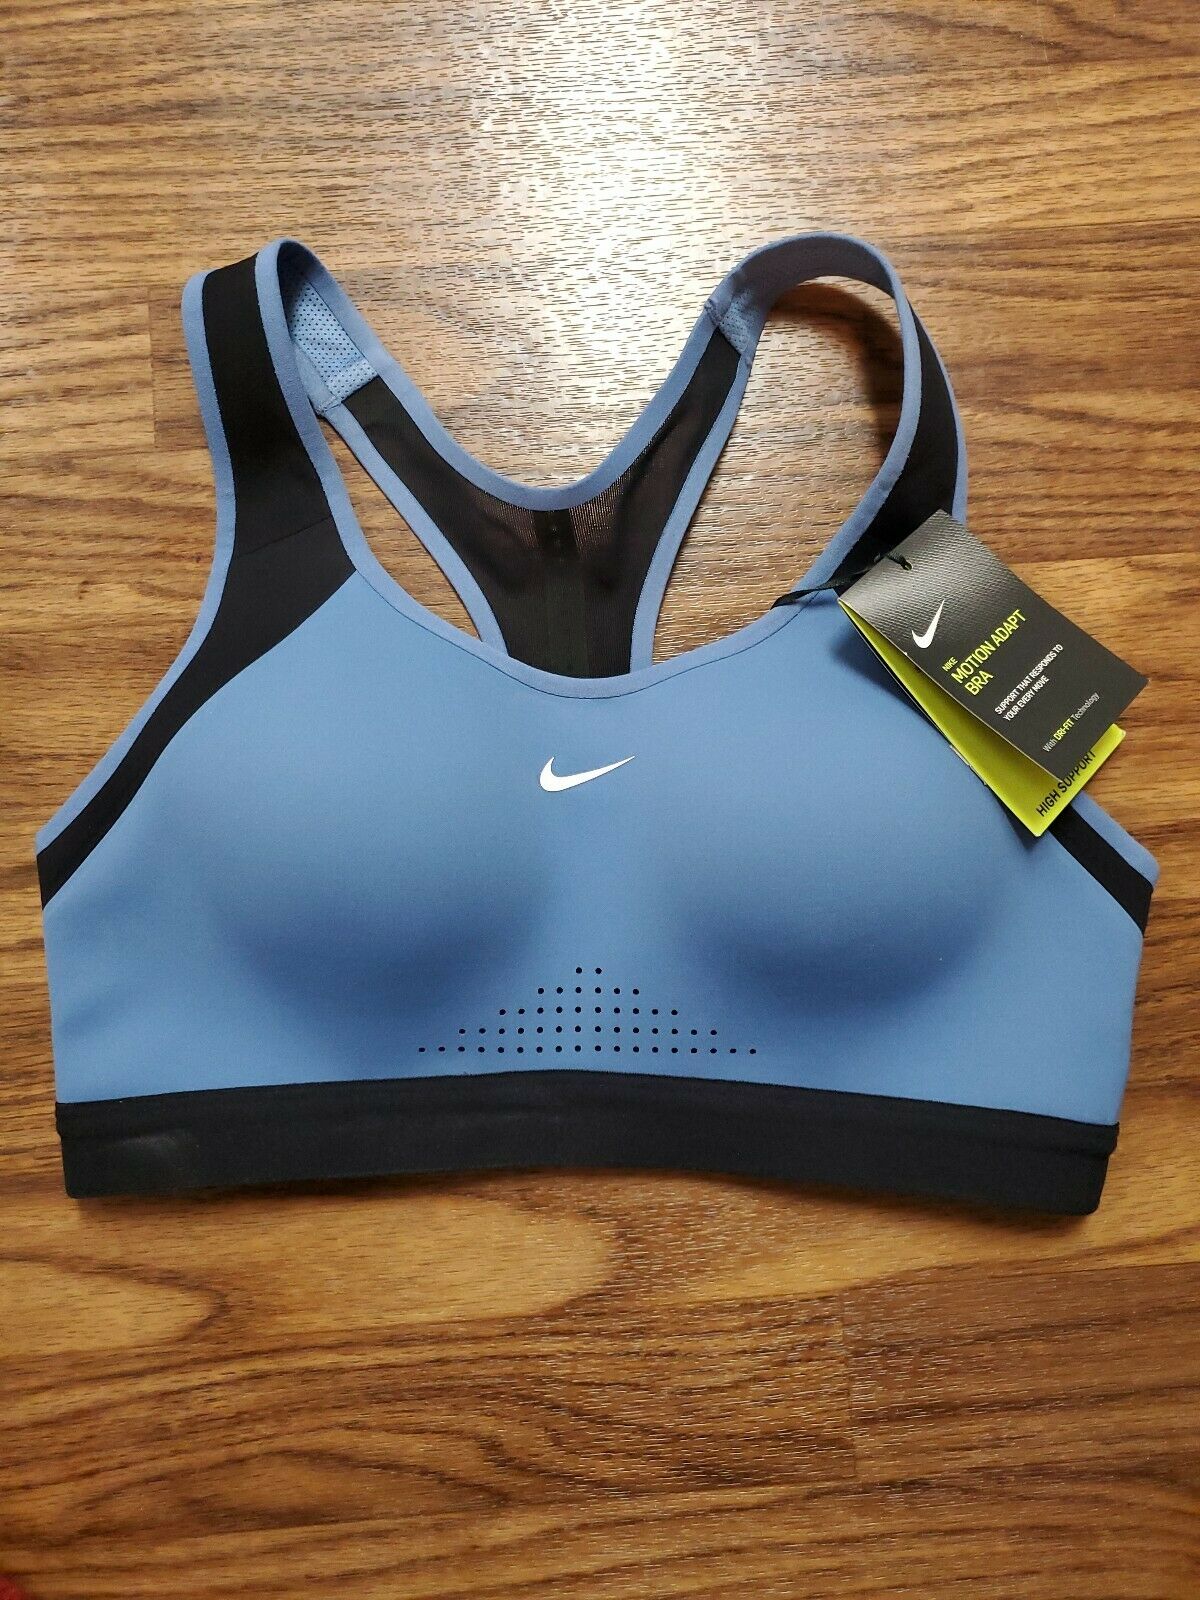 Nike Motion Adapt Bra Review | Bases 